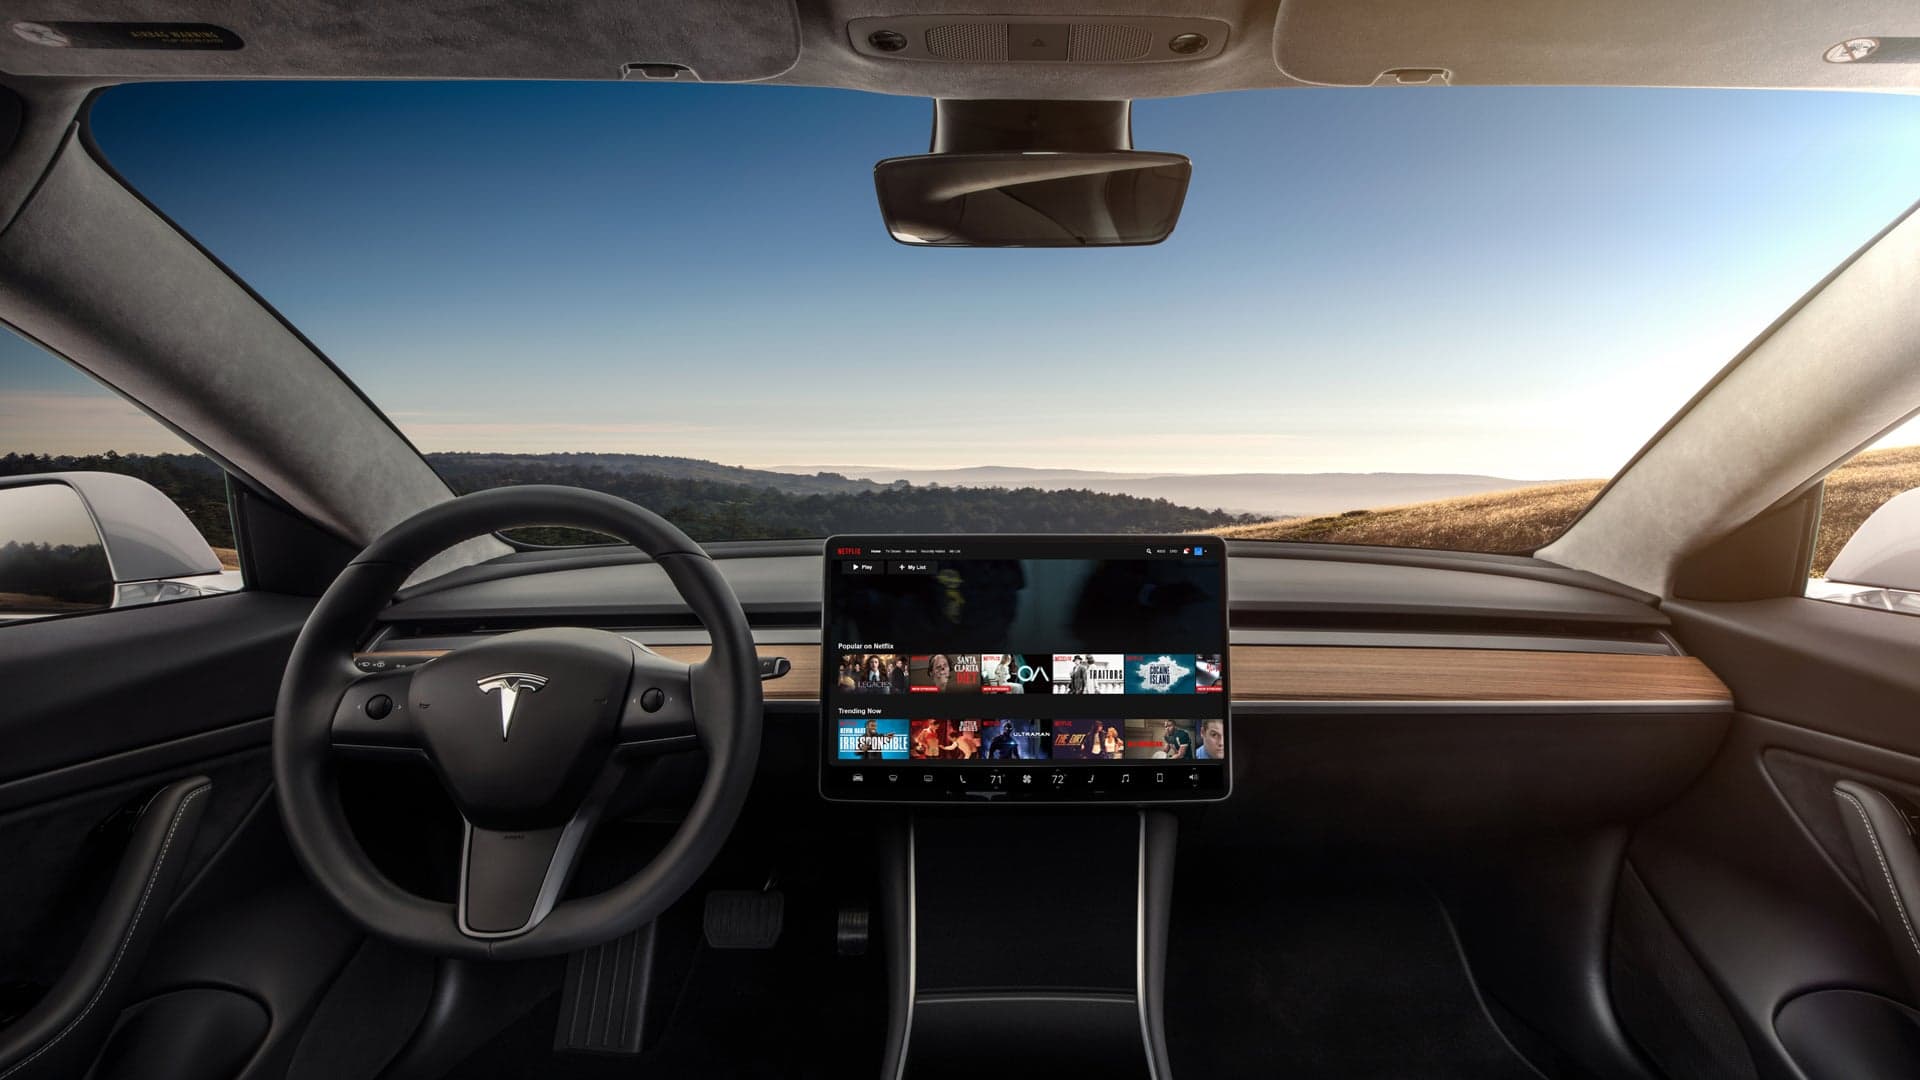 Tesla Will Soon Let You Watch Videos on Infotainment Screen to Kill Time at Superchargers